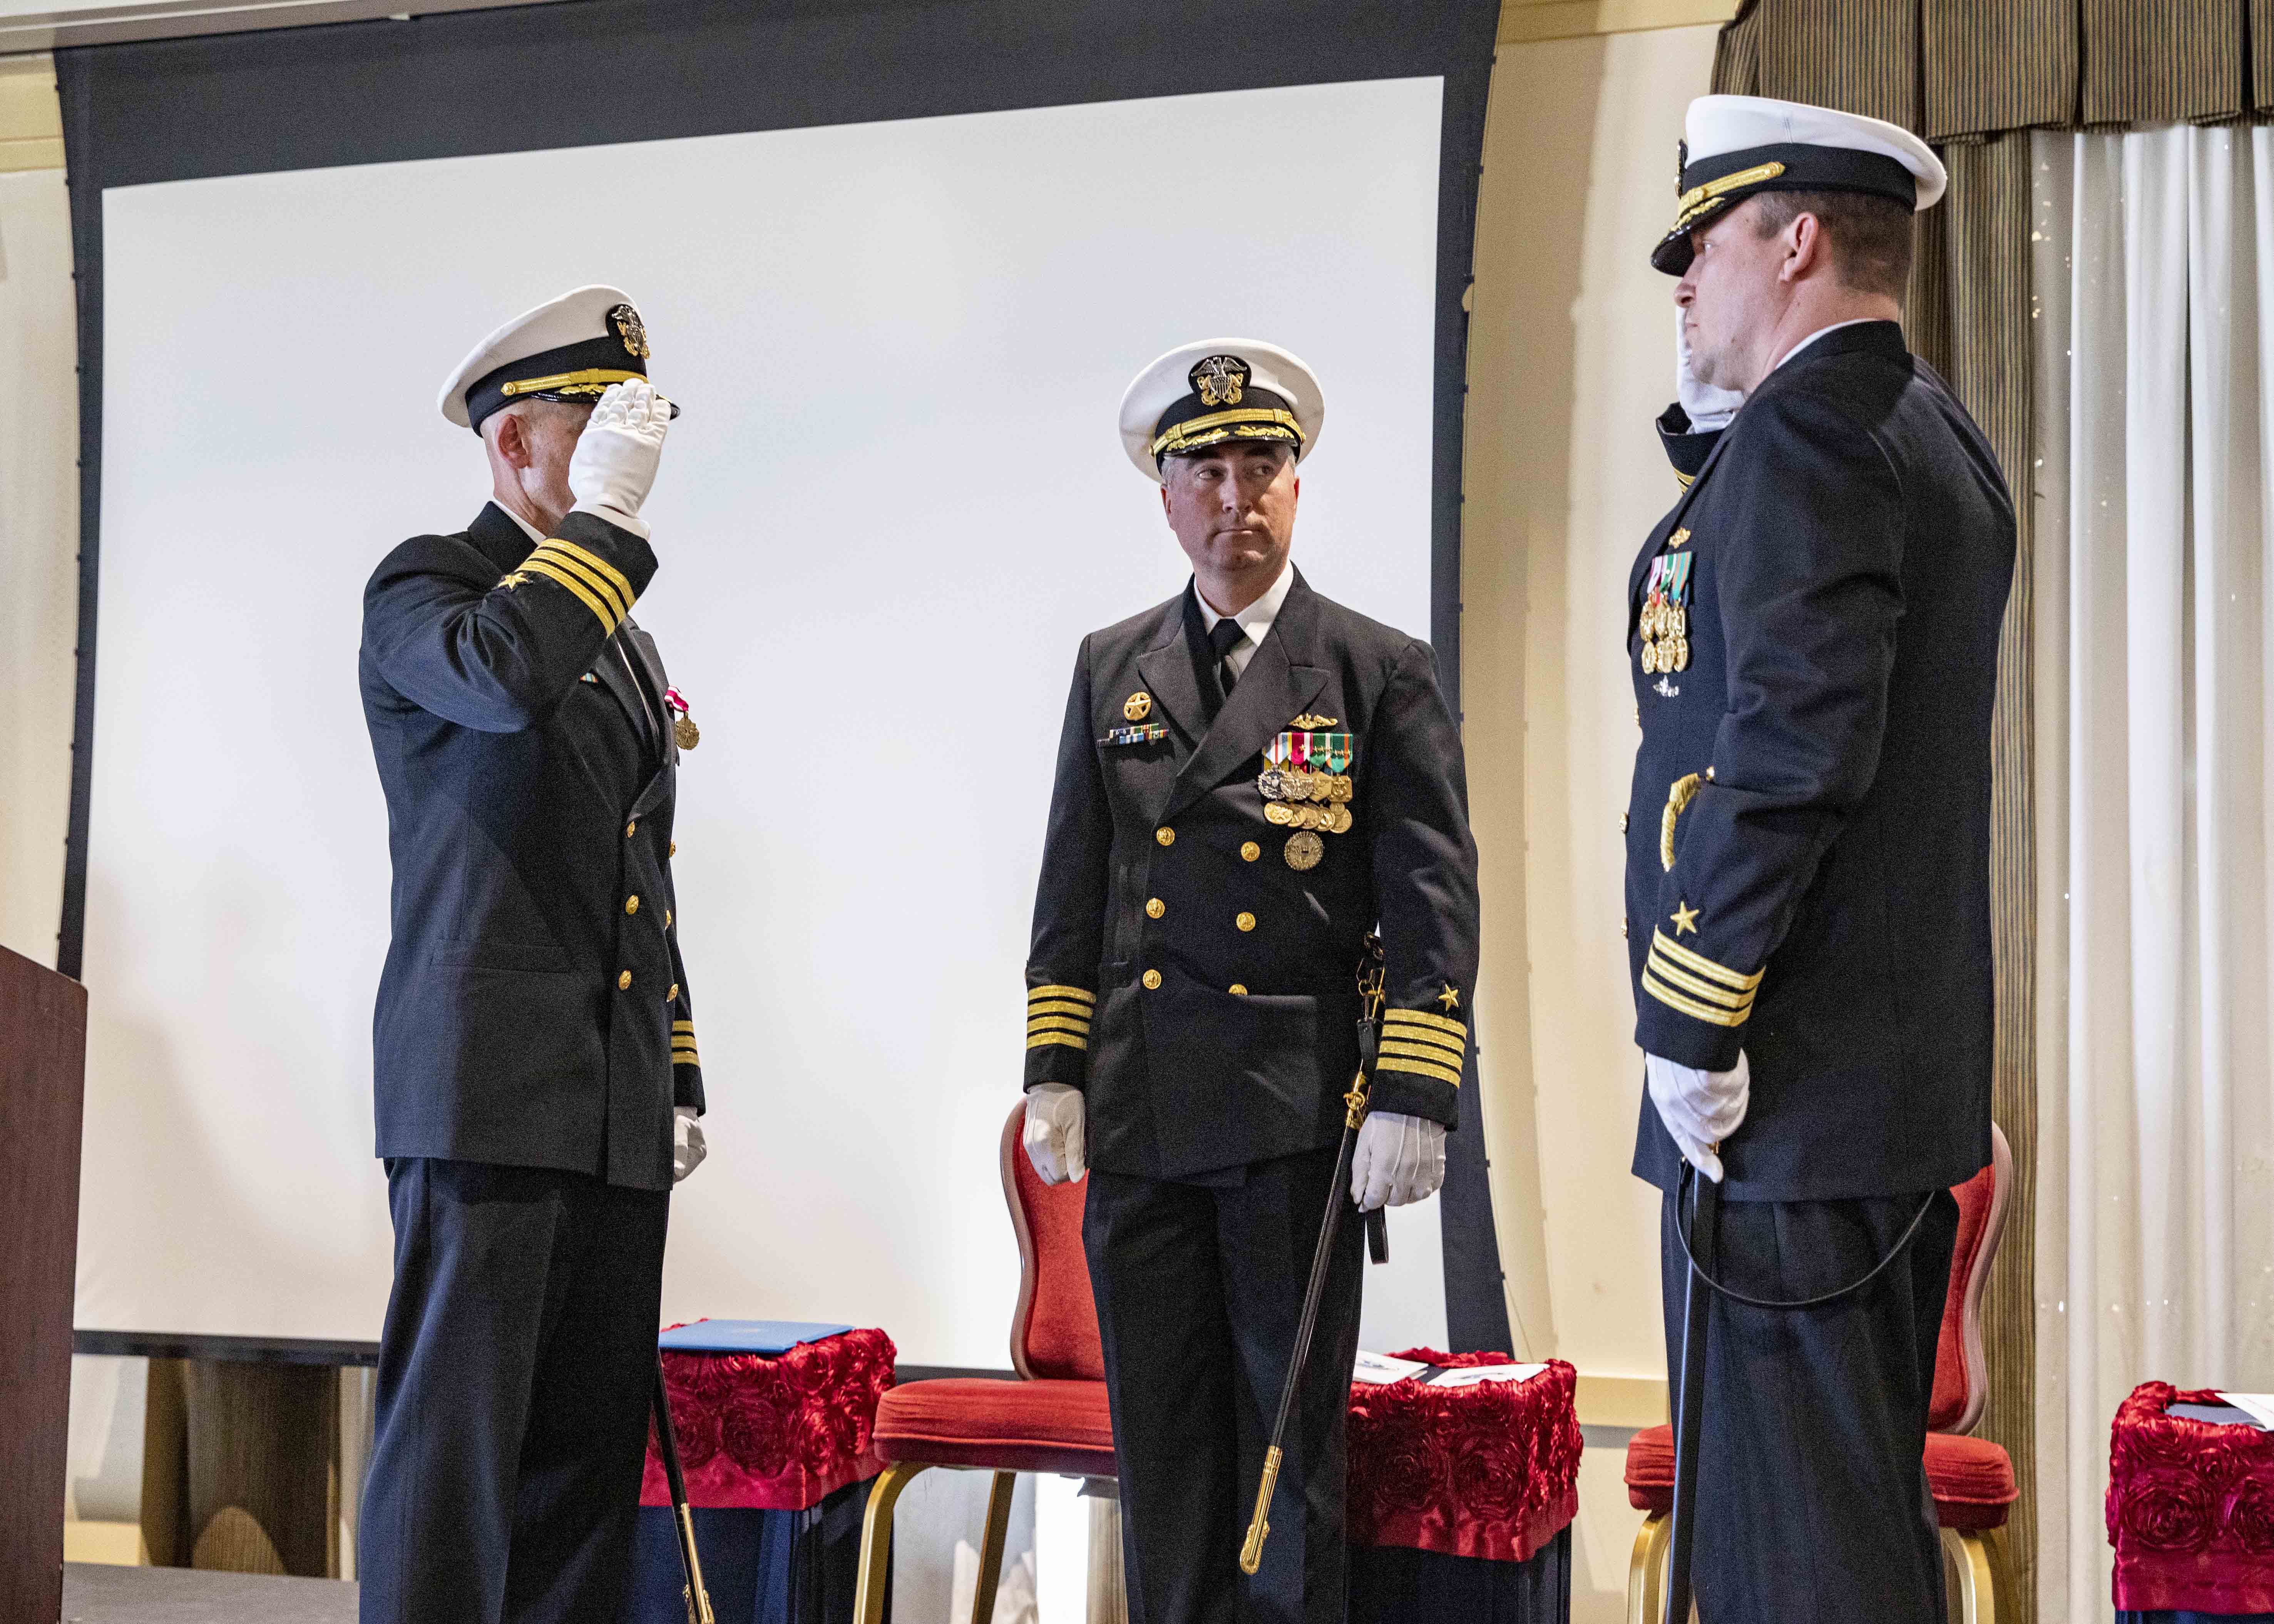 Capt. Brian Hogan, commodore, Submarine Squadron Eight, center, watches as Cmdr. Christopher Holland, right, relieves Cmdr. Jonathan Cantor, left, as commanding officer of the Los Angeles-class attack submarine USS Boise (SSN 764) during a change of command ceremony onboard Naval Station Norfolk, Oct. 21, 2022.